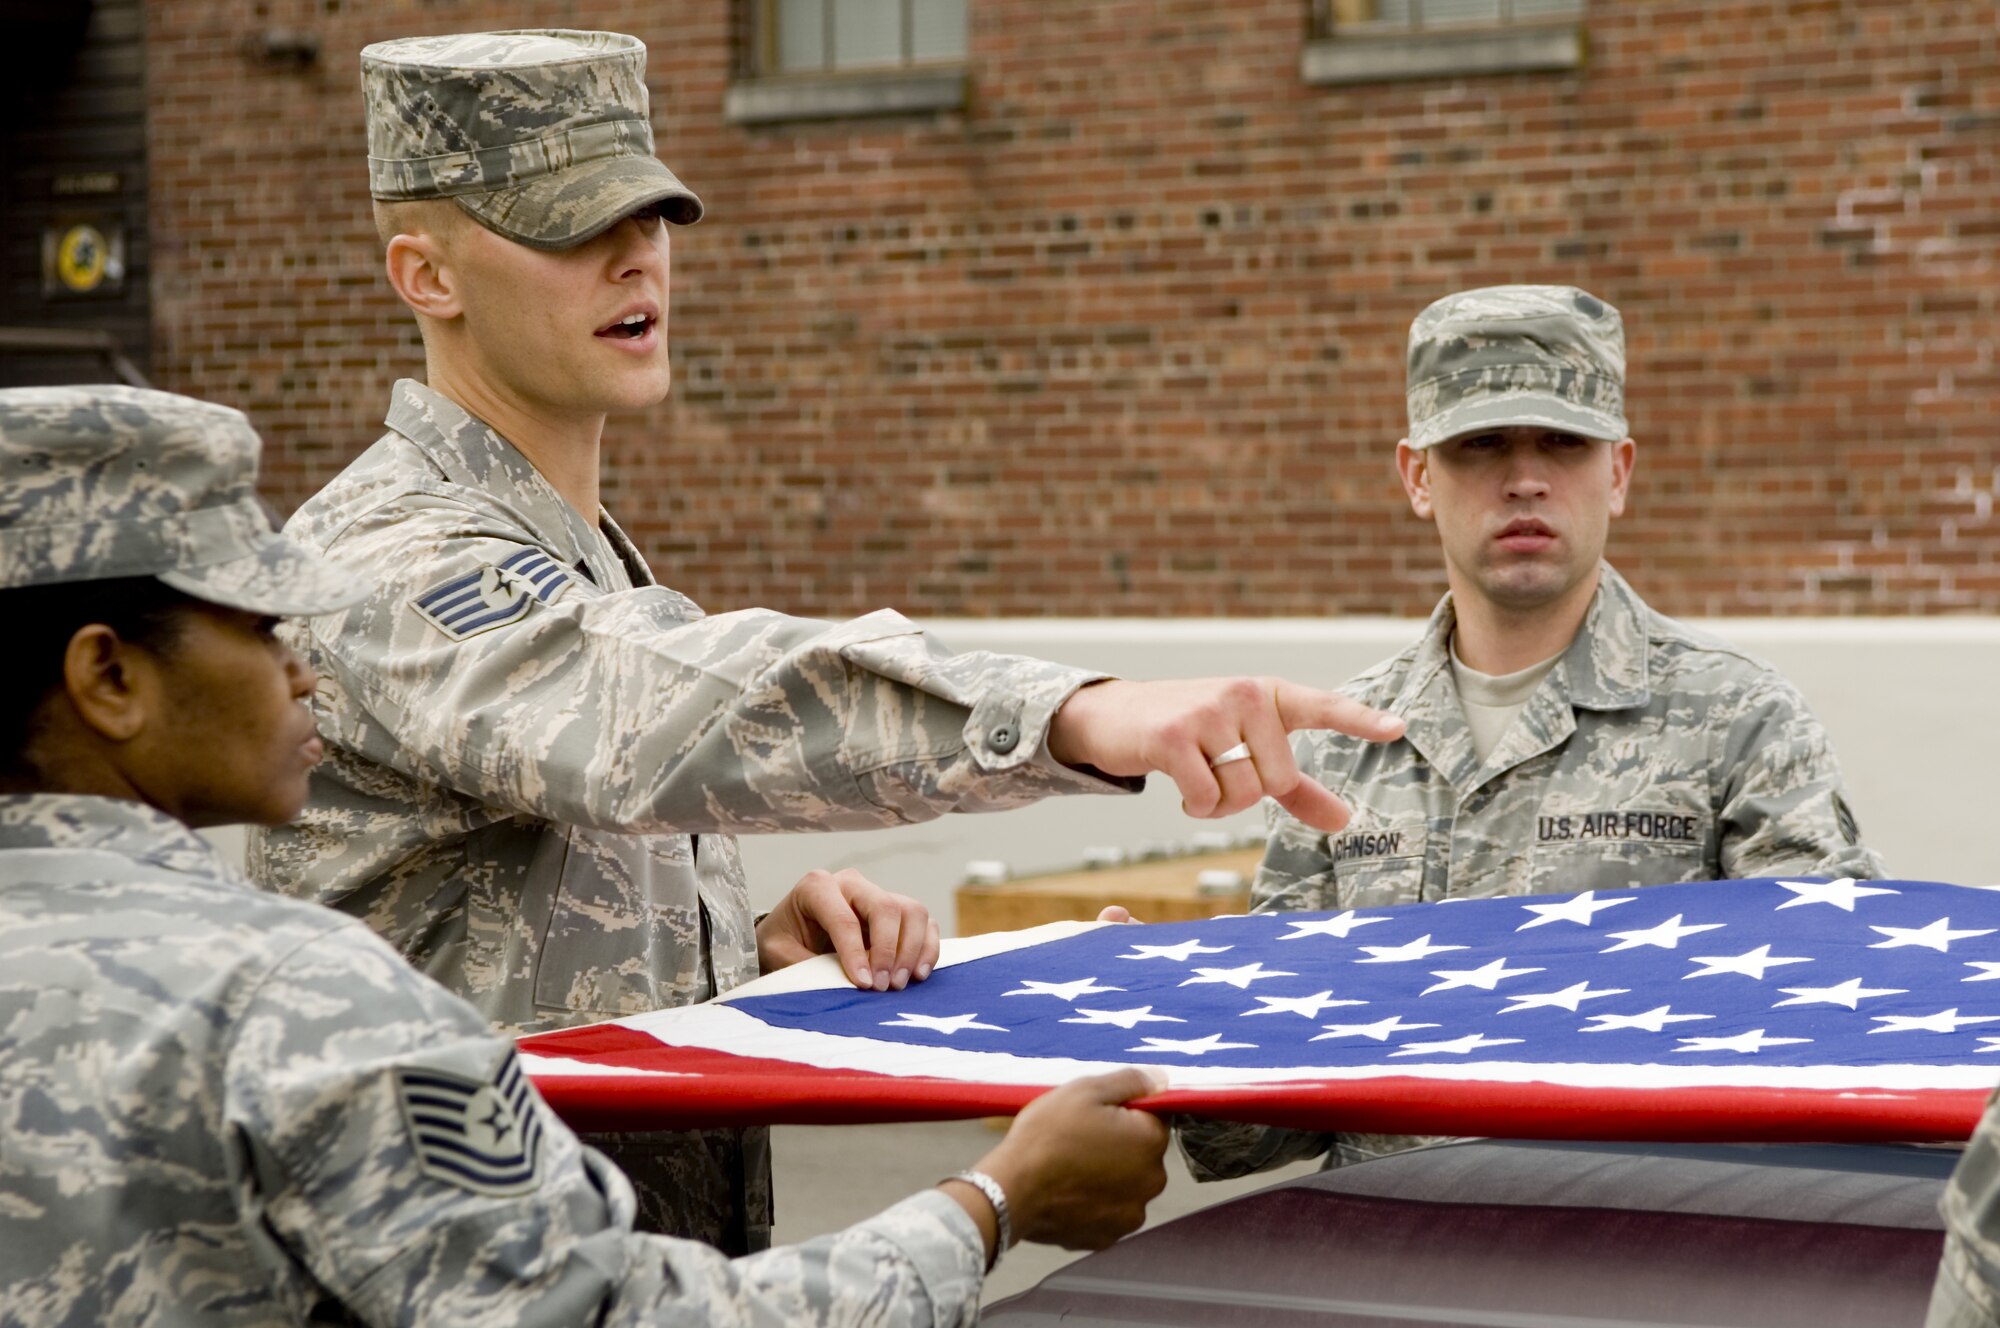 Staff Sgt. Alex Frizzo, U.S. Air Force Honor Guard formal training instructor, advises base honor guardsmen on proper flag-folding techniques during a reent training visit to McChord Air Force Base, Washington. (Photo courtesy of U.S. Air Force Honor Guard)